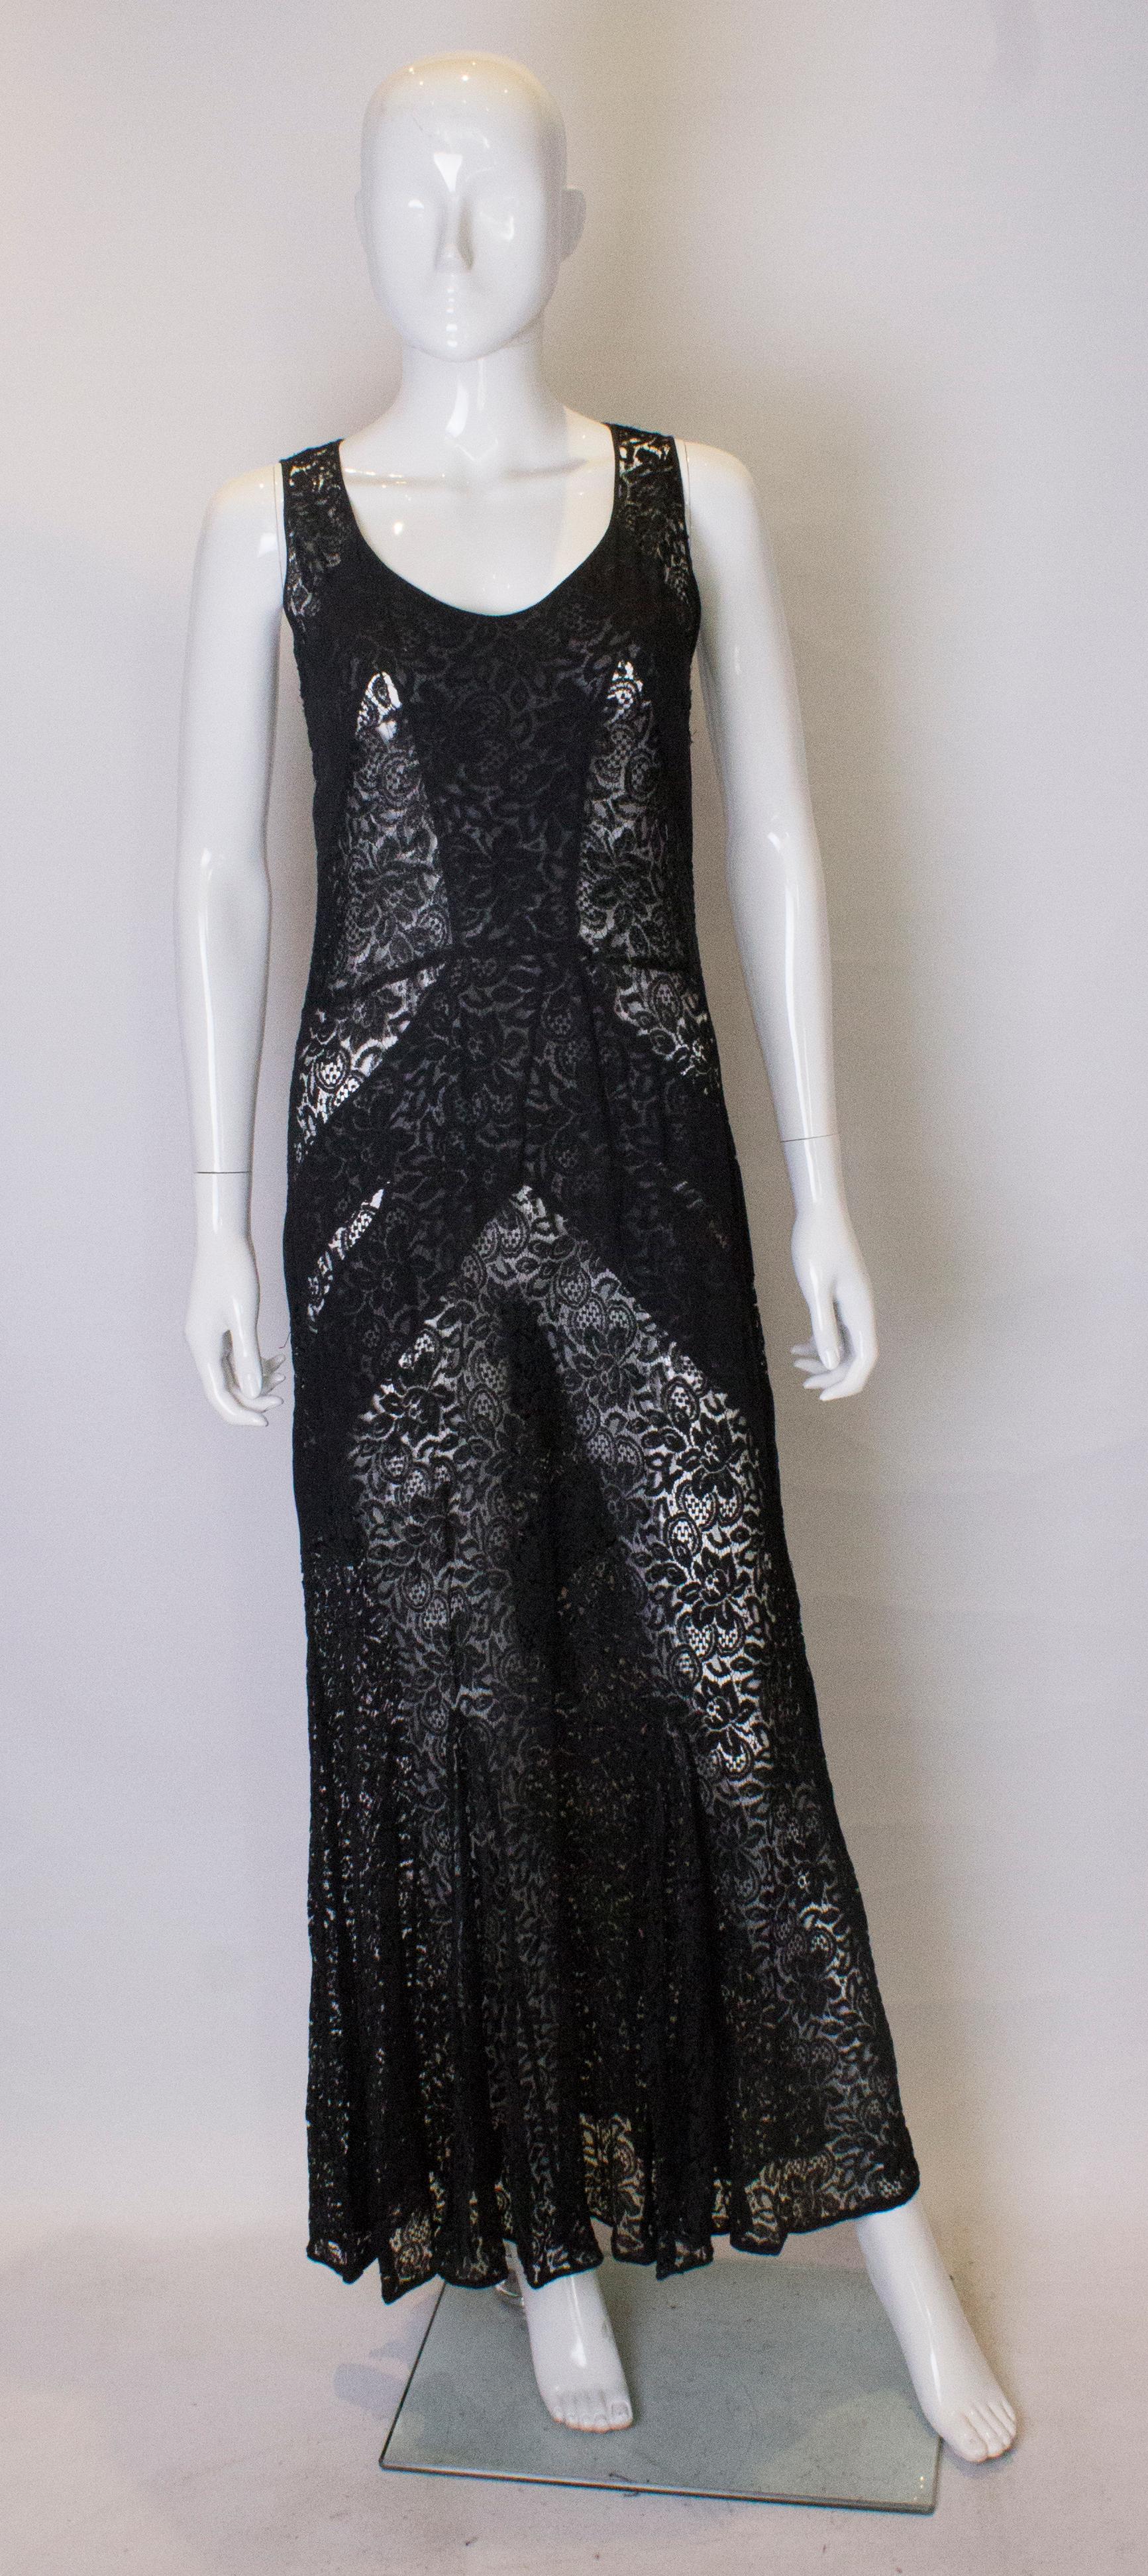 A chic 1930s black lace gown. The dress has a round neck at the front, with lace panels and a lace skirt. It has ribbon edging around the hem.